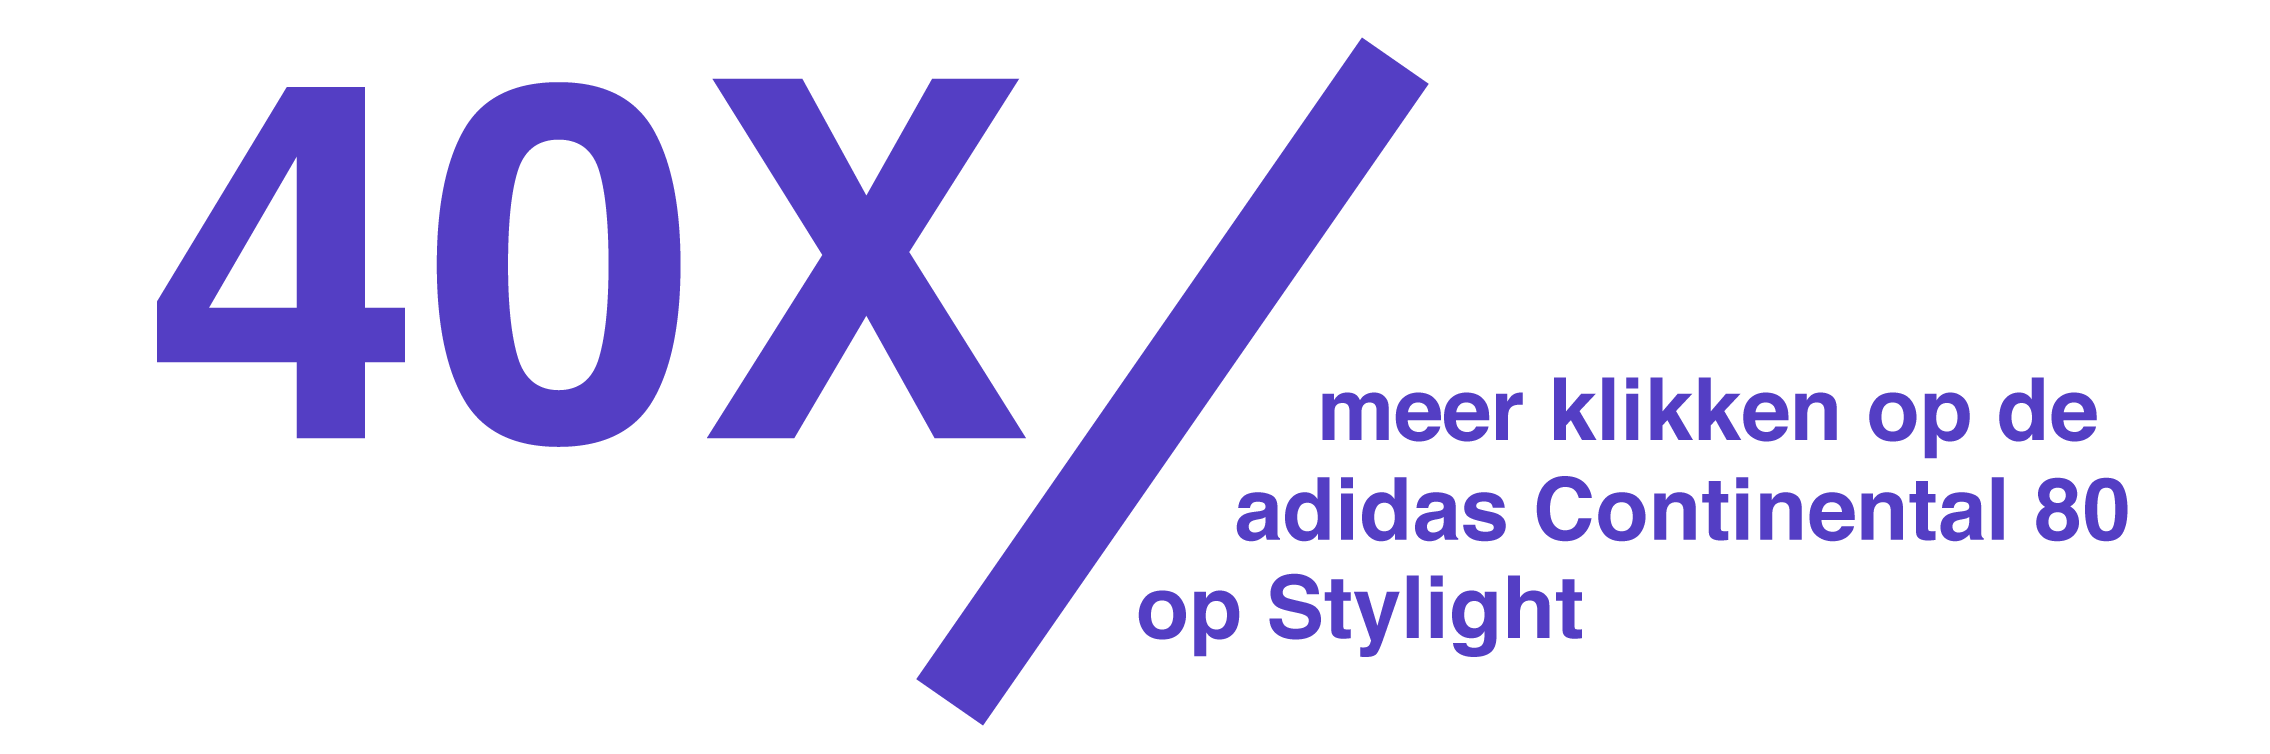 adidas-continentals-numbers_NL